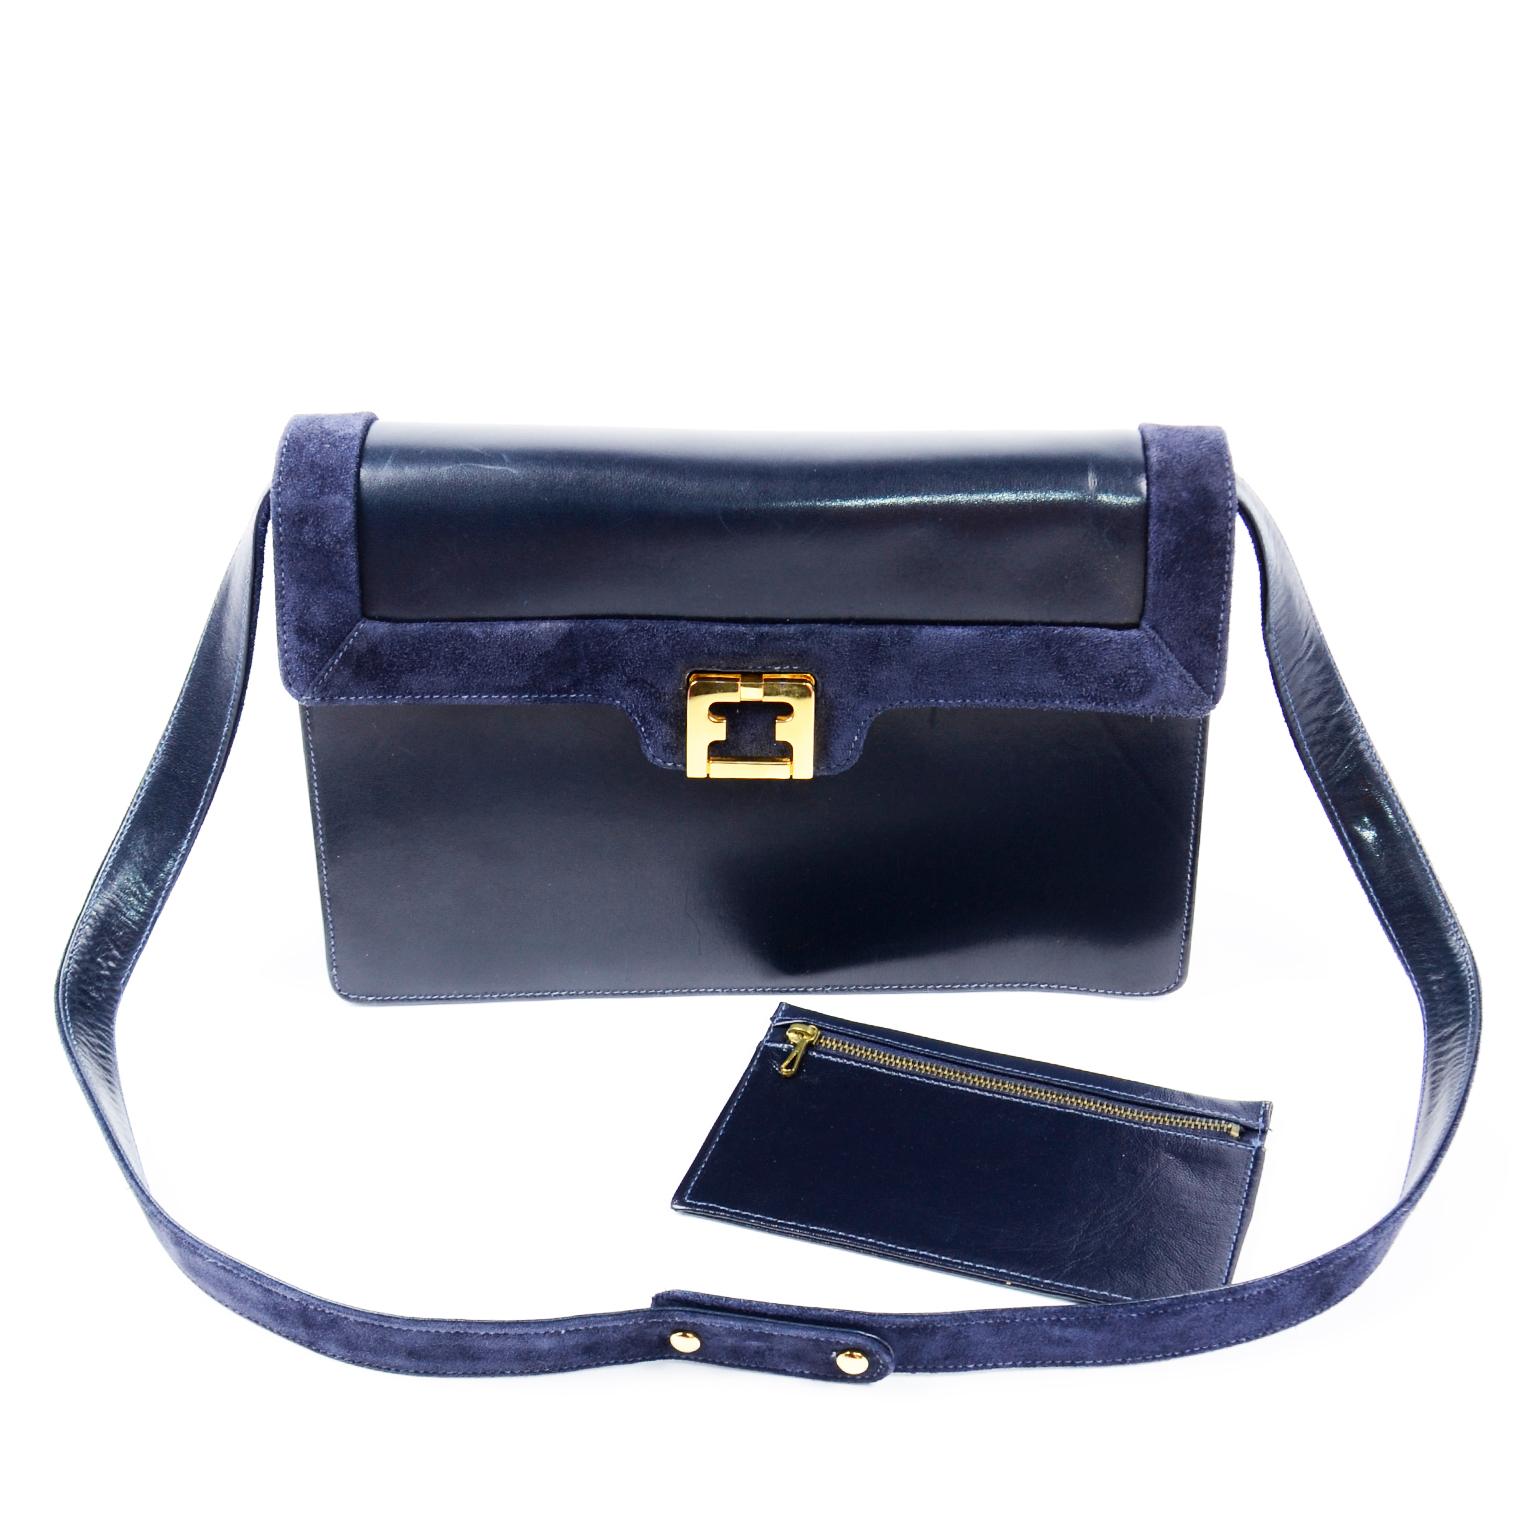 This is a lovely vintage navy blue leather Salvatore Ferragamo handbag with  blue suede trim around the edges of the flap extending to the back and a removable, adjustable suede strap with snaps. We love the pretty gold metal folding clasp! The bag